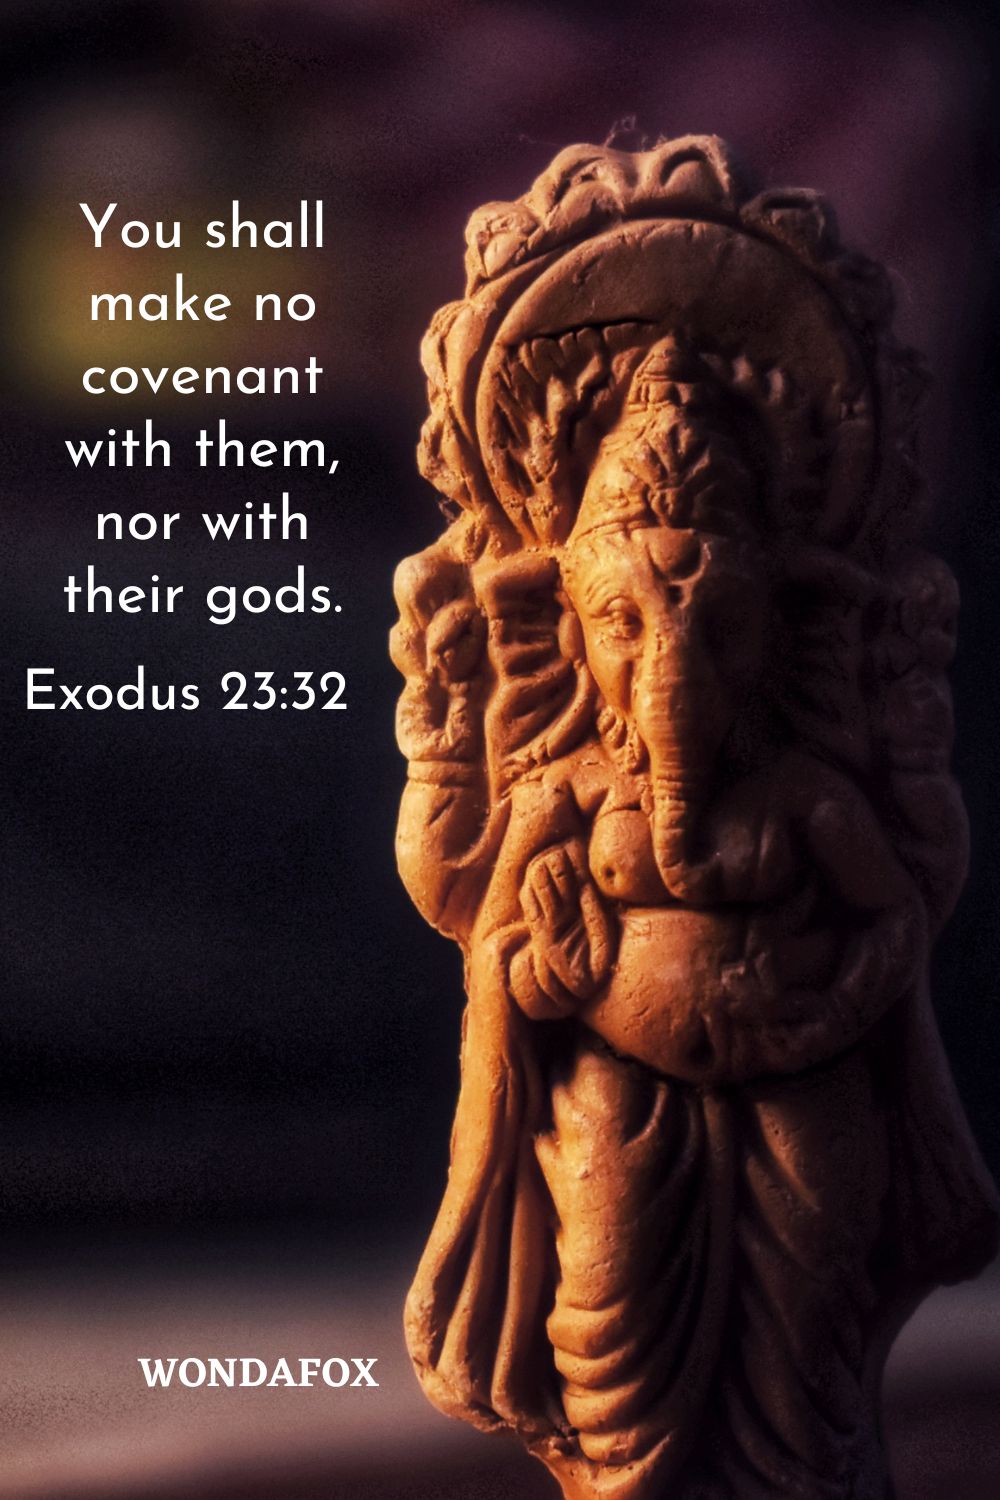  You shall make no covenant with them, nor with their gods.
Exodus 23:32